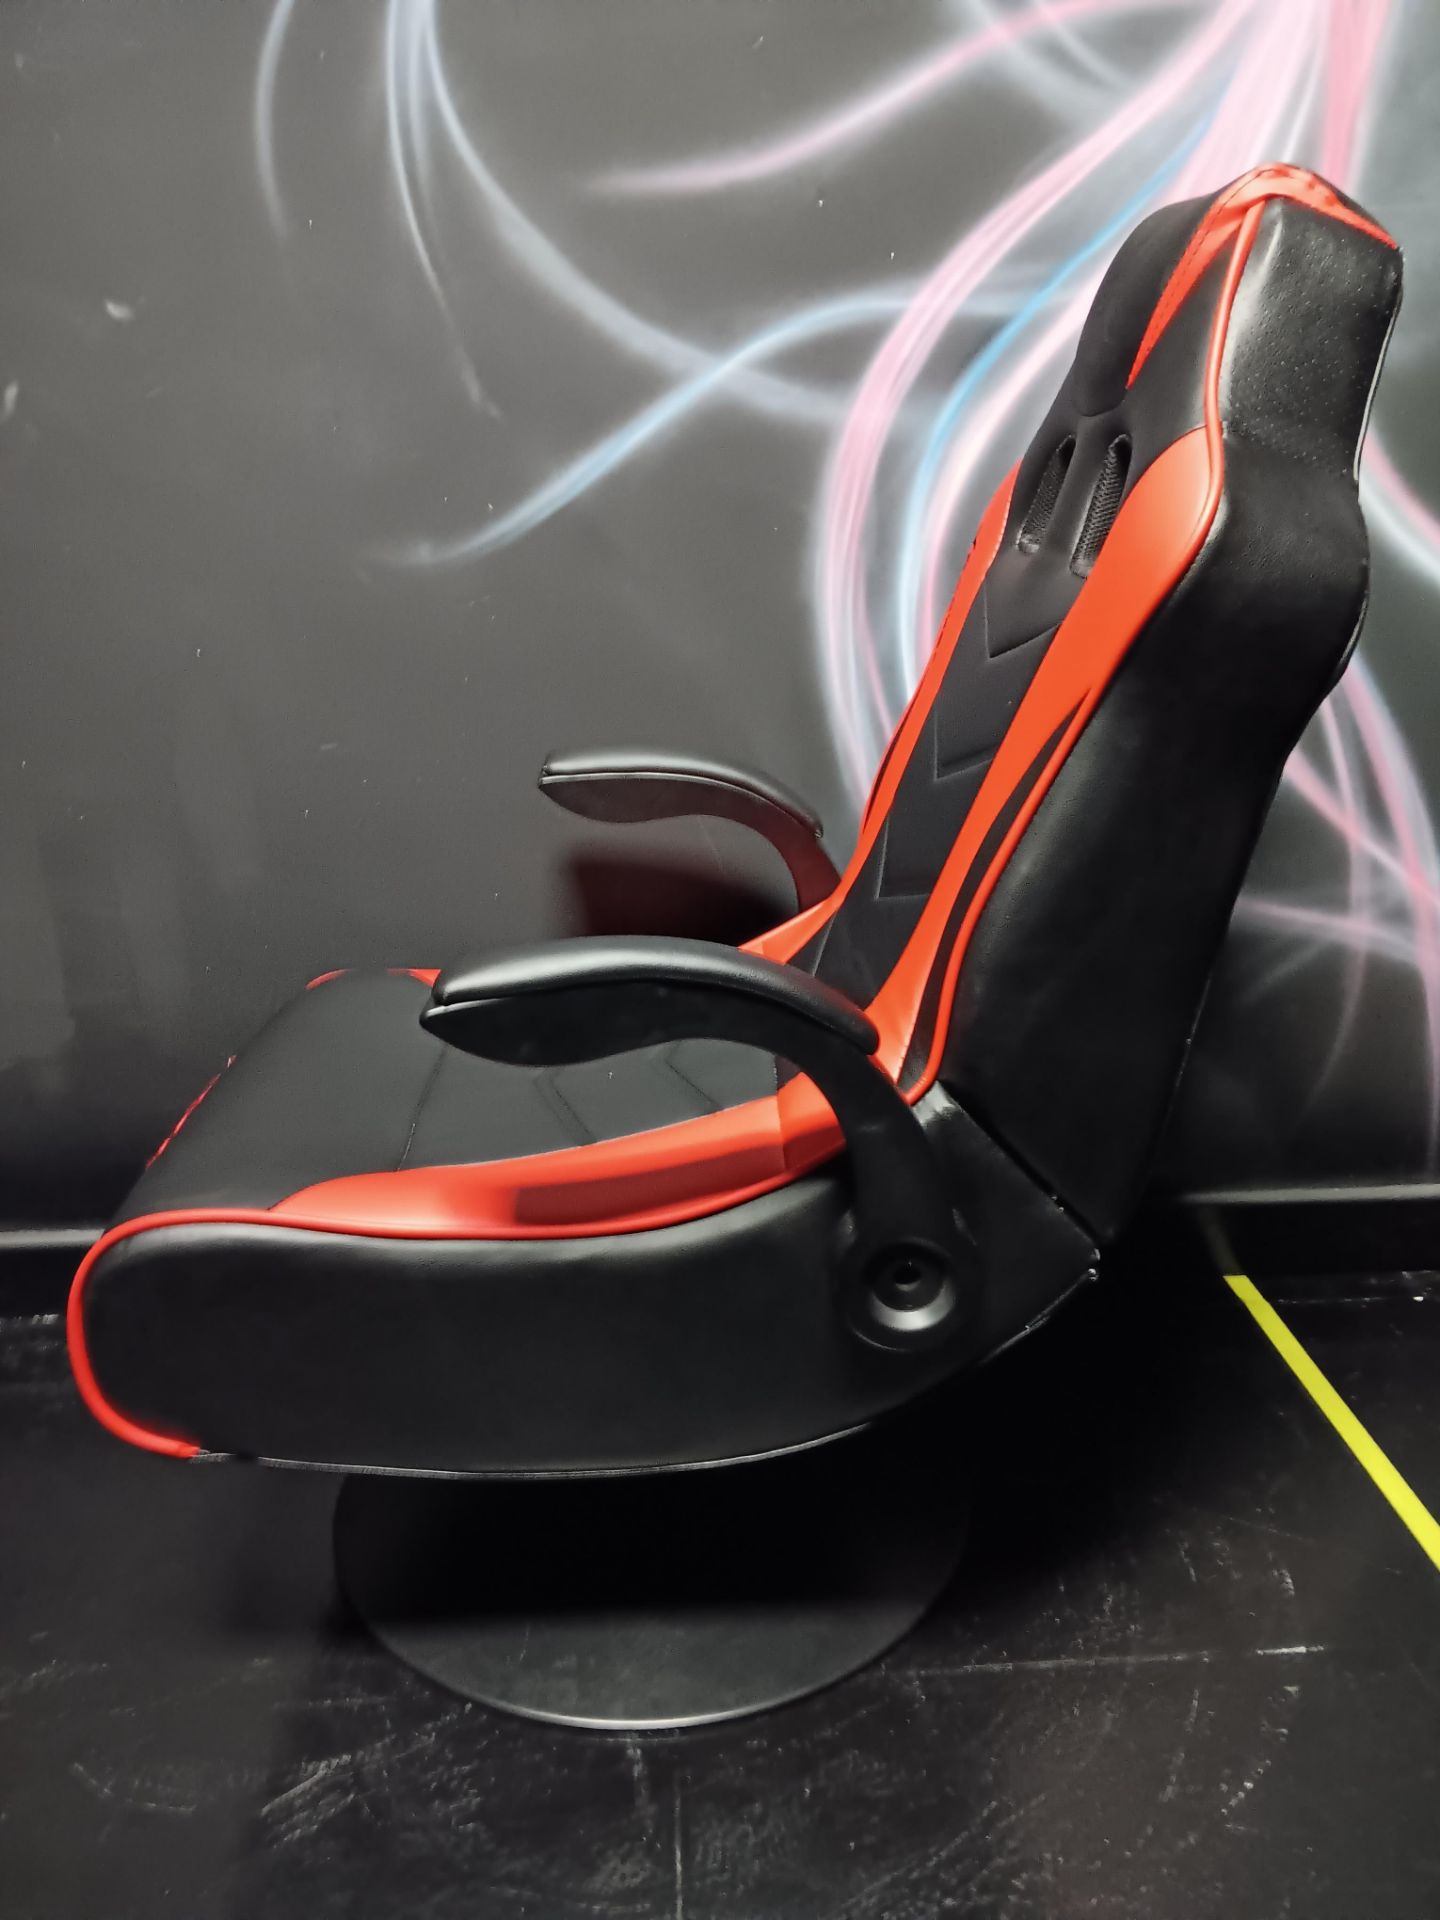 X Rocker Viper Wireless Gaming Chair - Image 3 of 4